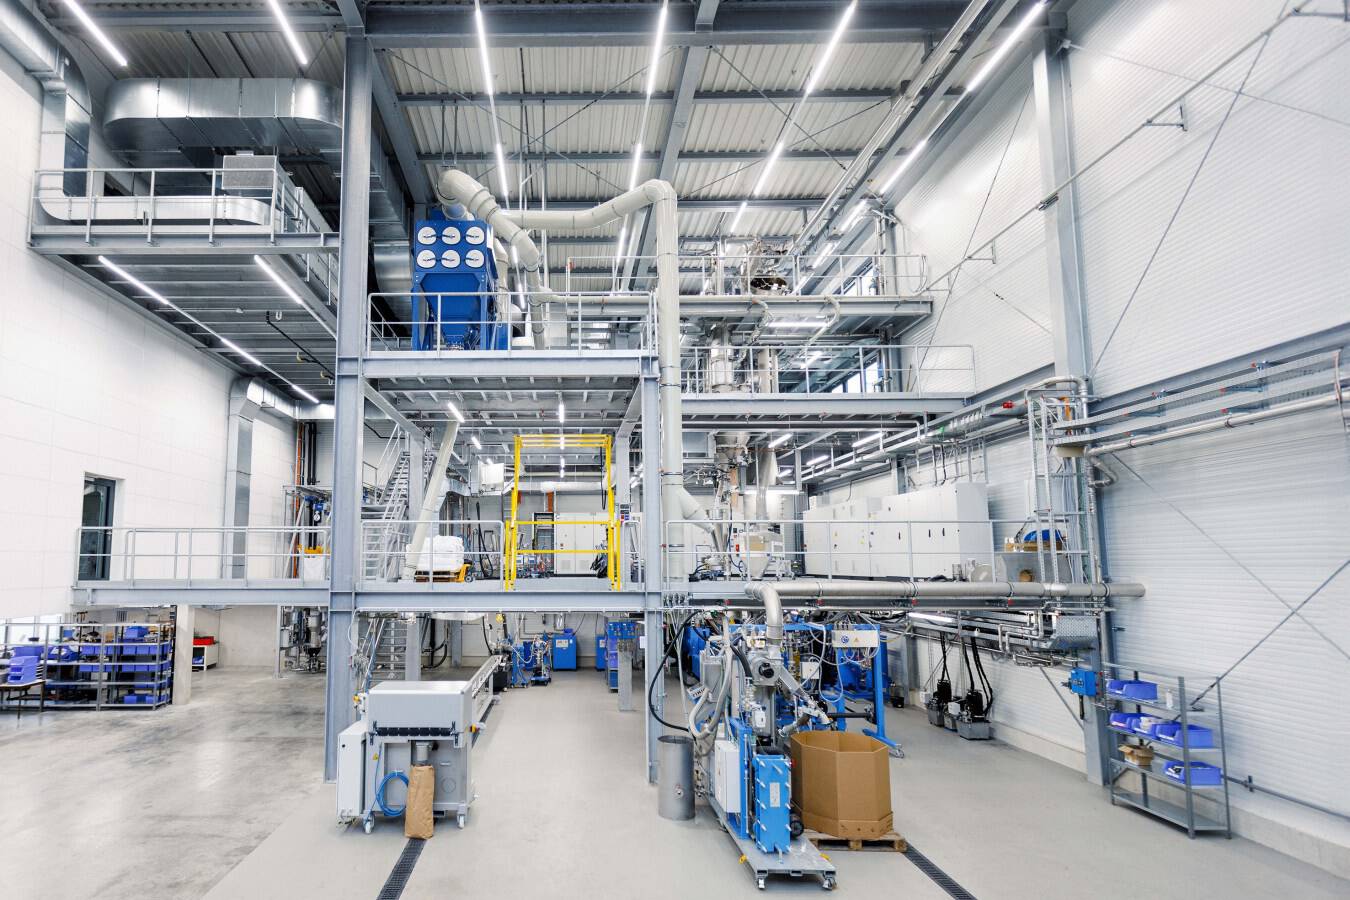 Coperion Recycling Innovation Center is Up and Running New Coperion Test Center for optimizing plastics recycling. In this high-tech test center for plastics recycling applications, every recycling process step can be tested.